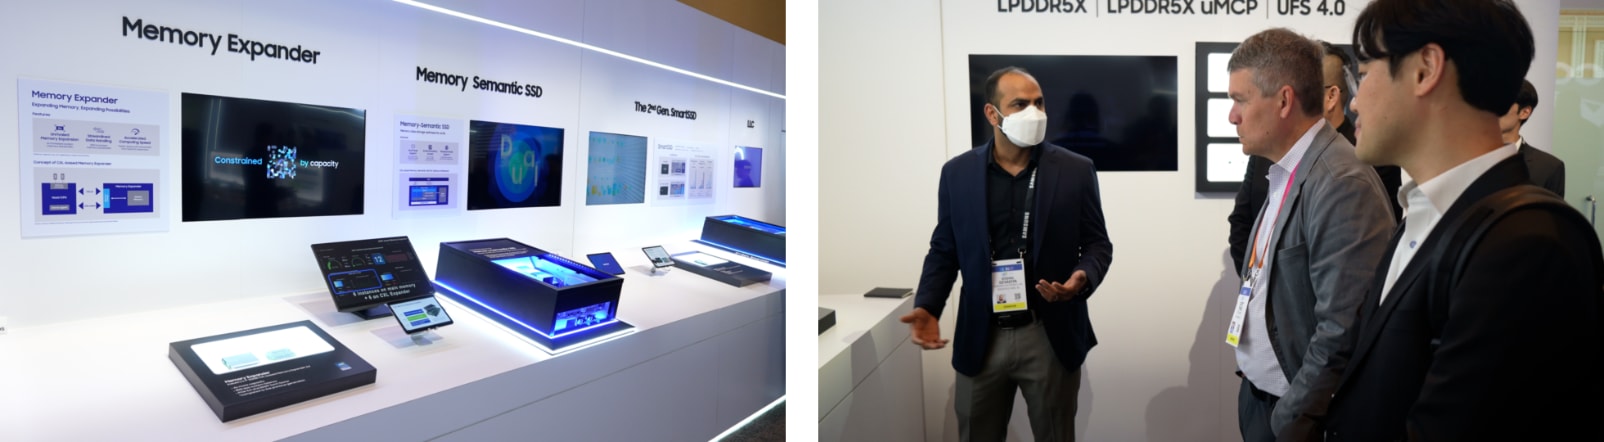 (Left) Samsung’s Memory Expanders are on display showing how they can easily increase server memory capacities to meet growing high-tech uses. (Right) Samsung Semiconductor representative explains the technology behind Samsung’s cutting-edge DDR5 module to visitors.